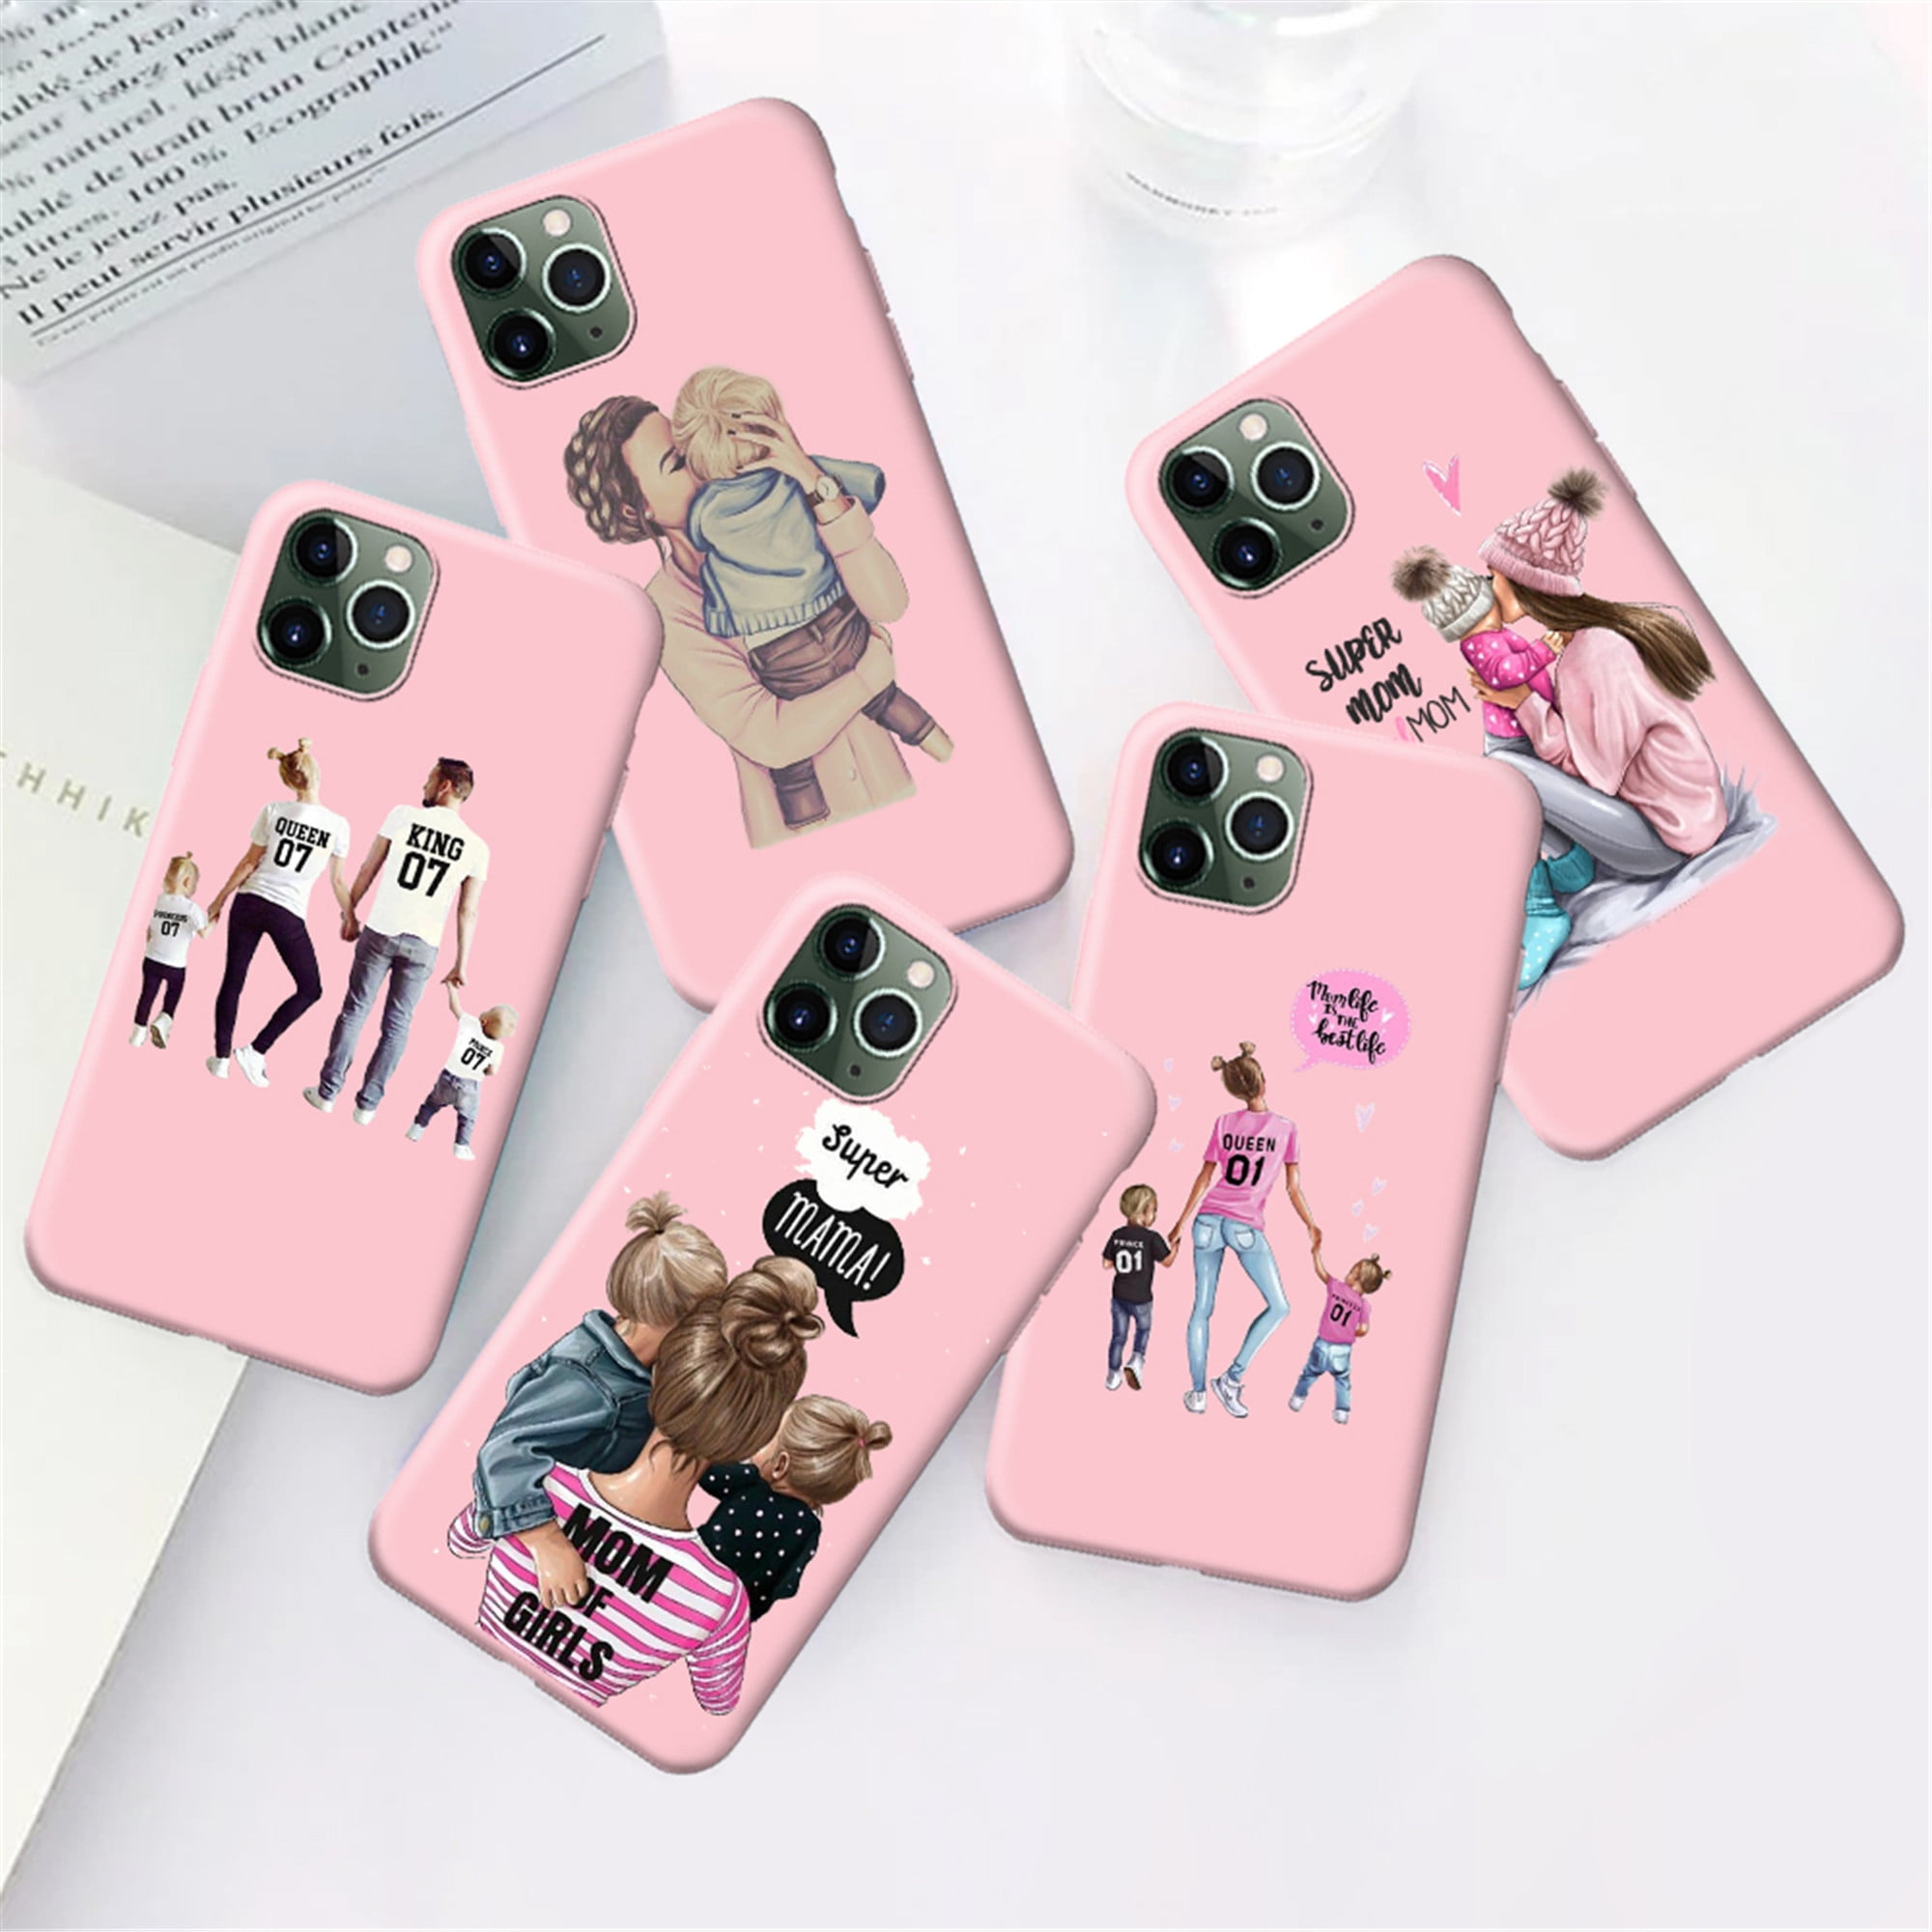 Unicorn Baby Pink Stars Flip Phone Case Cover Premium Quality for iPhone 12 11 X XR XS Max 8 7 Samsung Galaxy